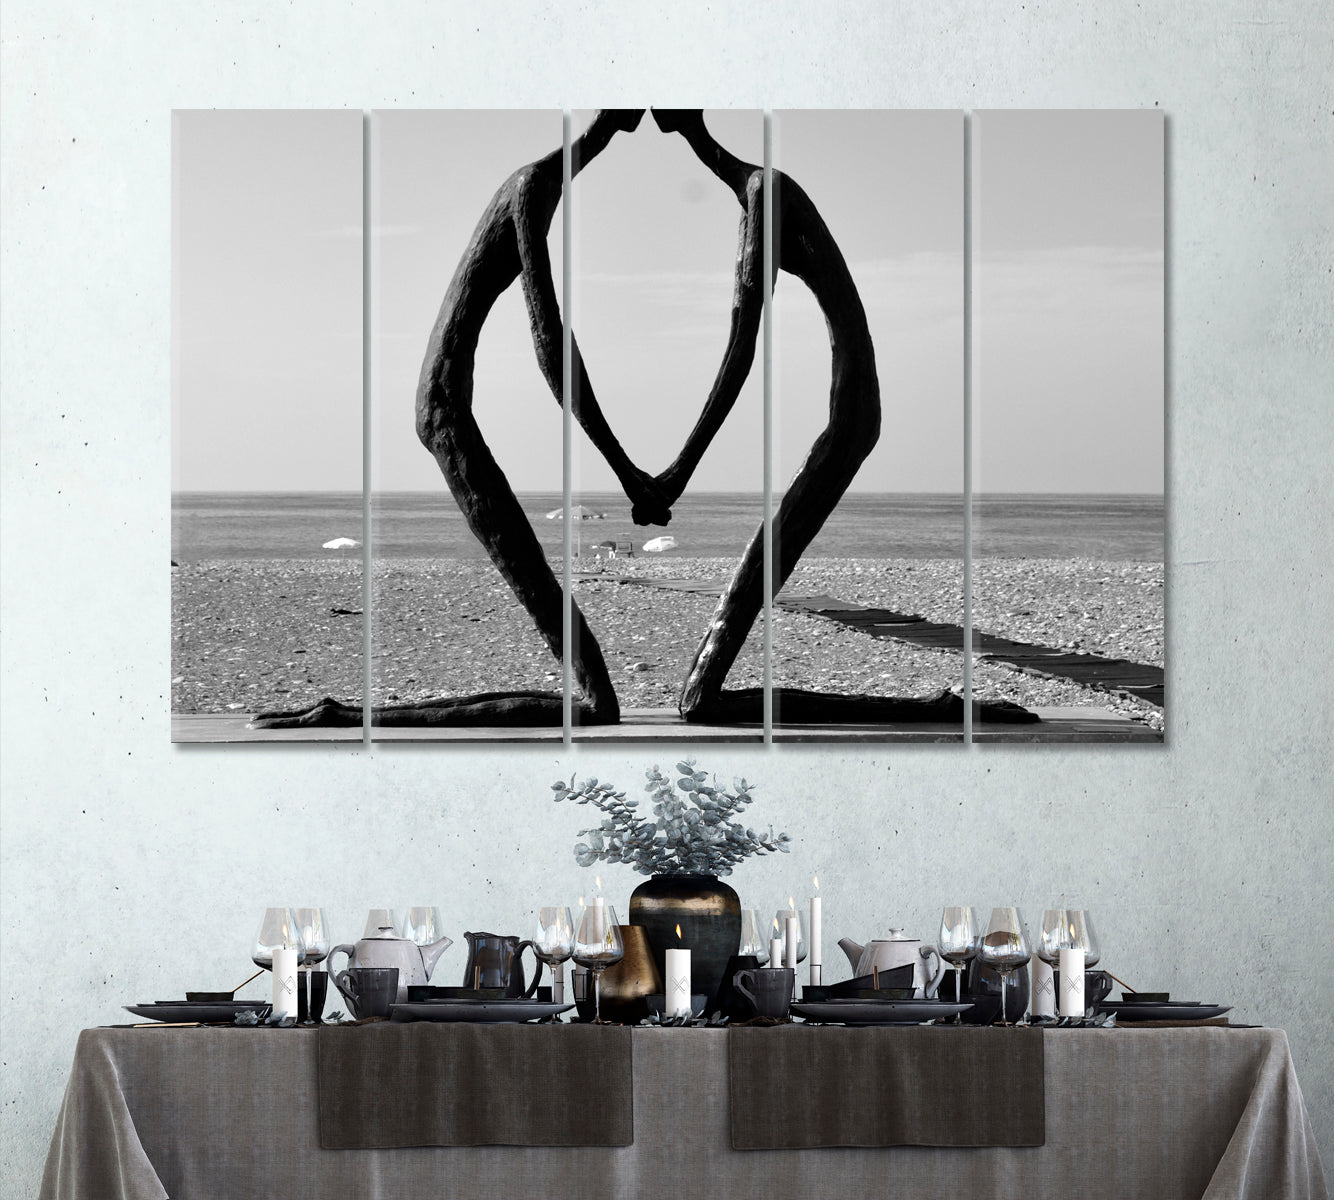 Abstract Architectural Forms People in Love Black and White Wall Art Print Artesty 5 panels 36" x 24" 